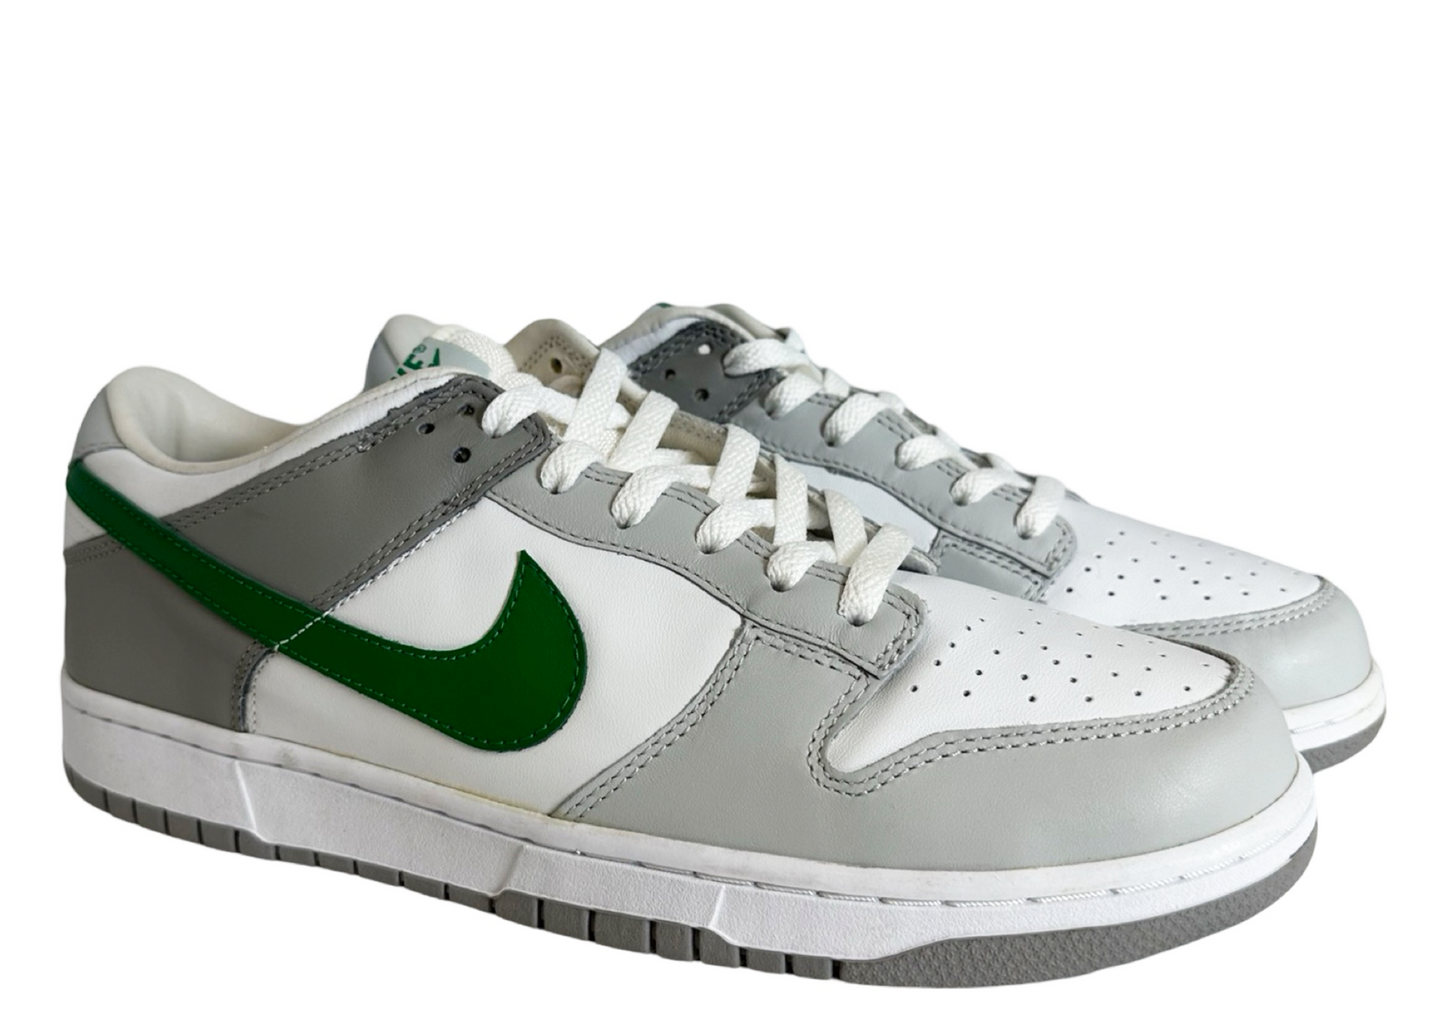 Nike Dunk Pro Low Neutral Gray Classic Green